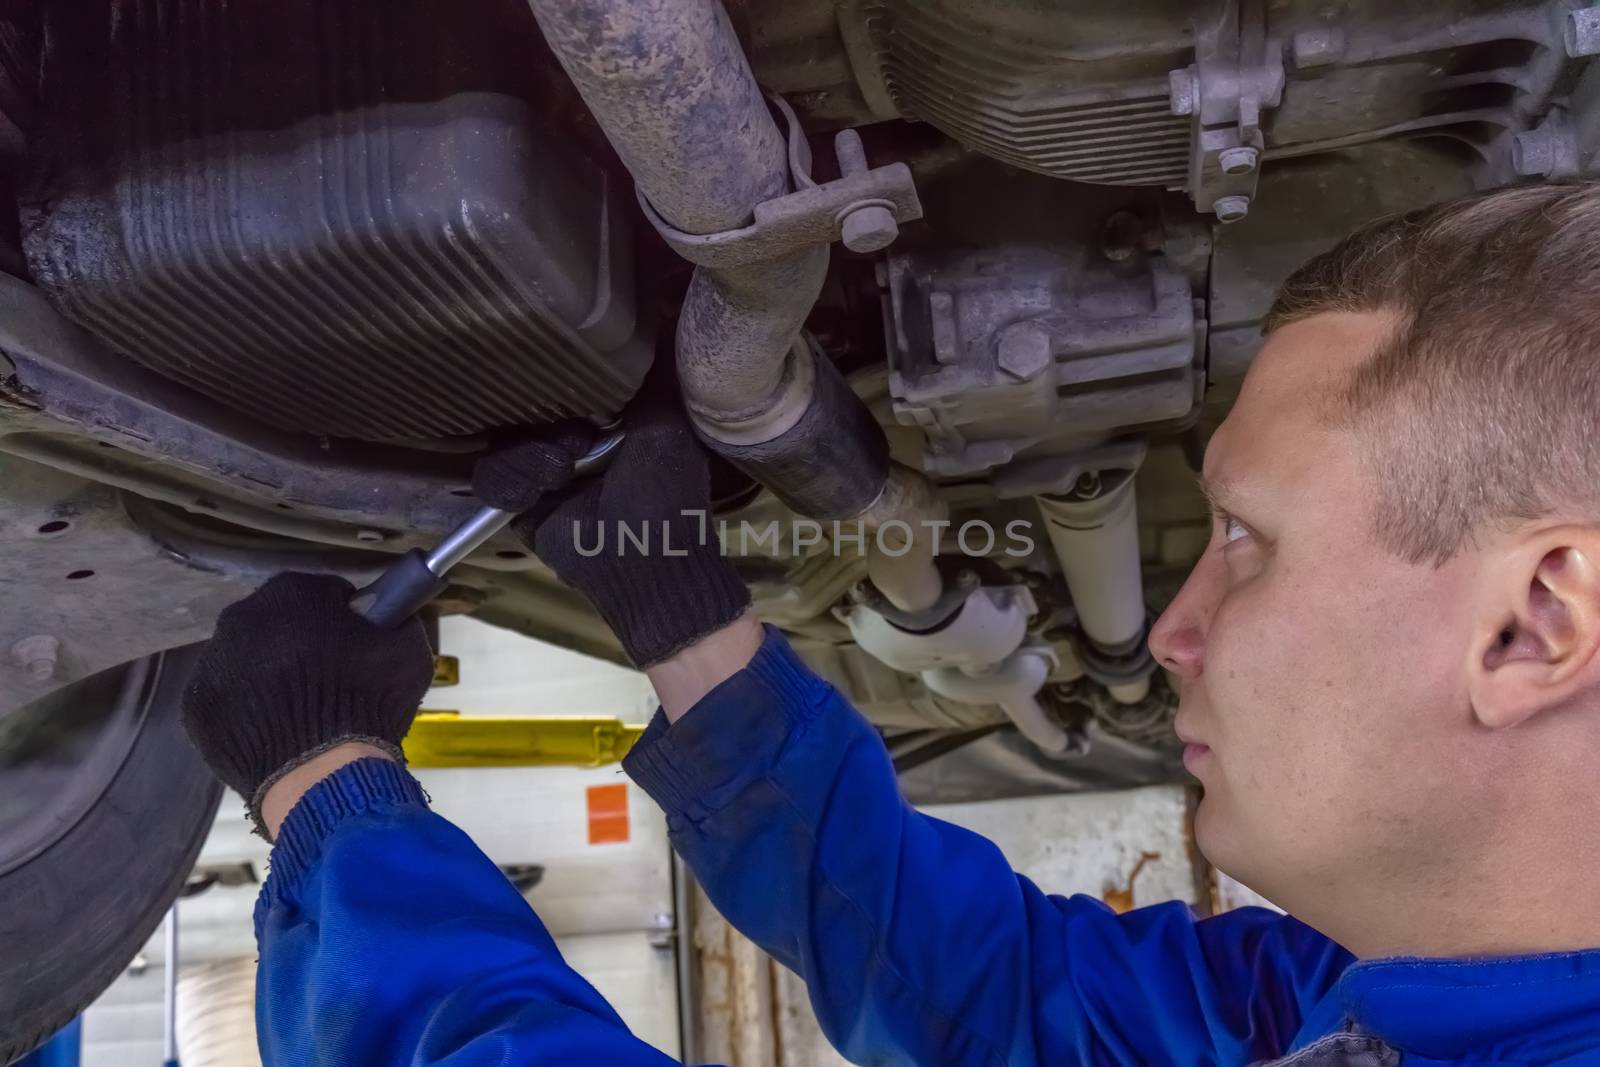 A close-up shot of a mechanic working under a car at the garage. Technician wearing blue coverall and using a wrench. Car is on a hydraulic lift.